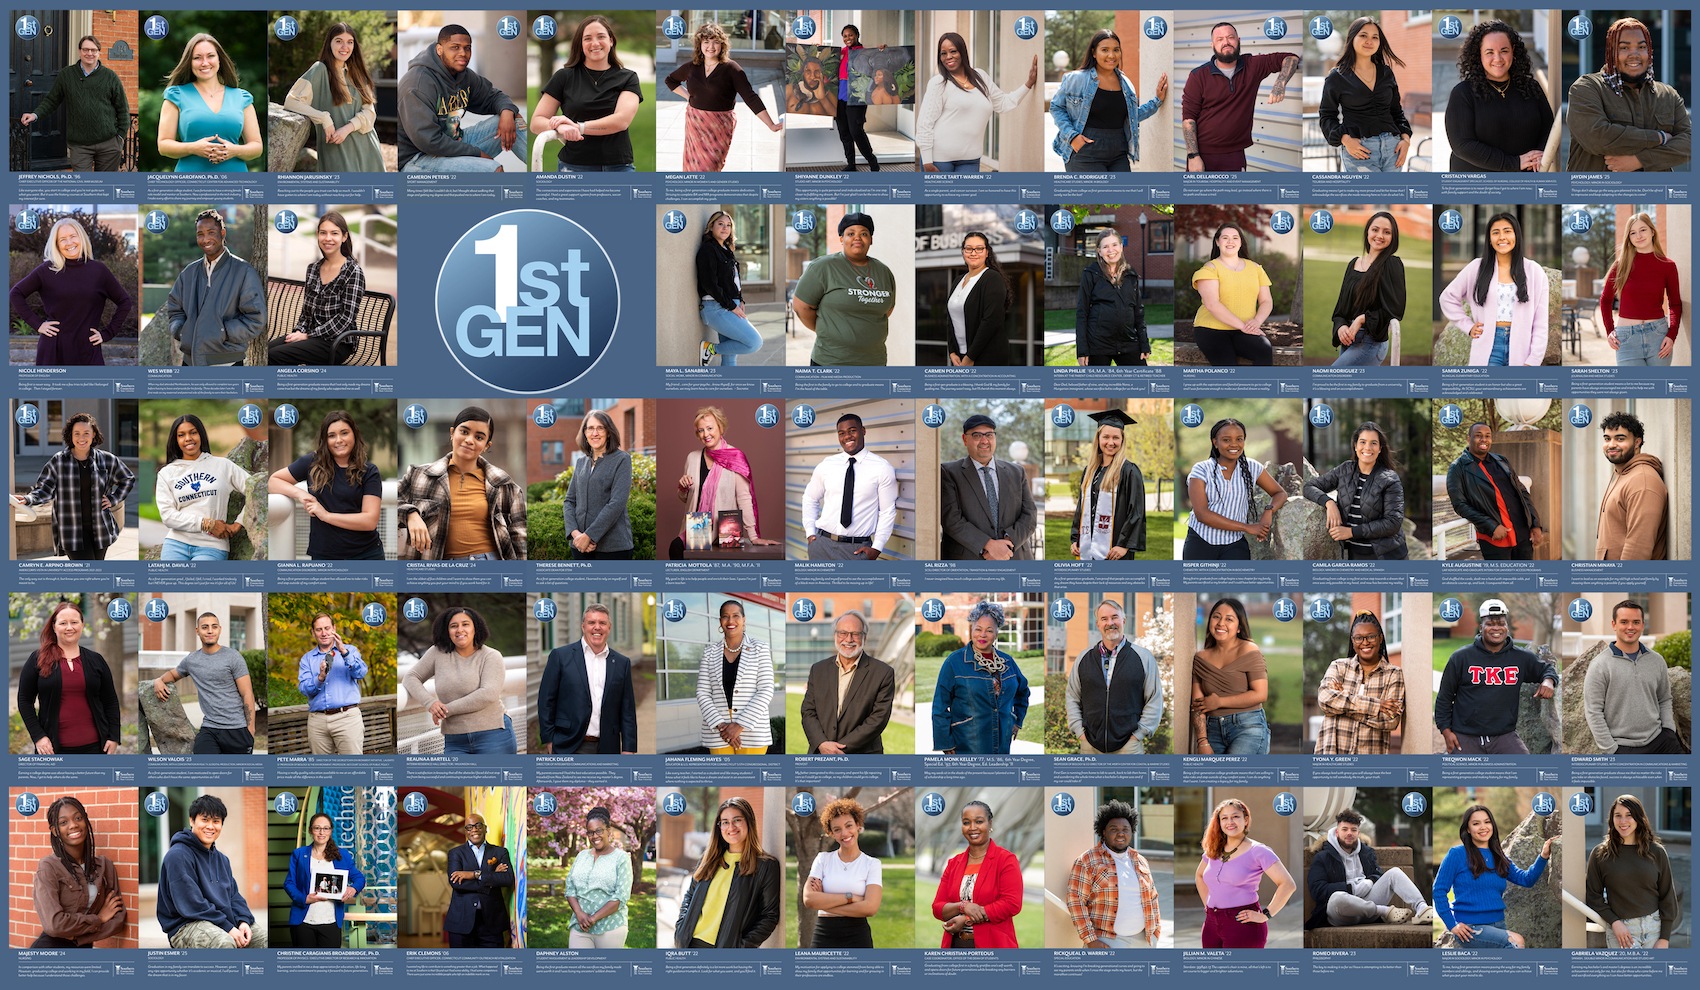 A collage of images of student, faculty and staff